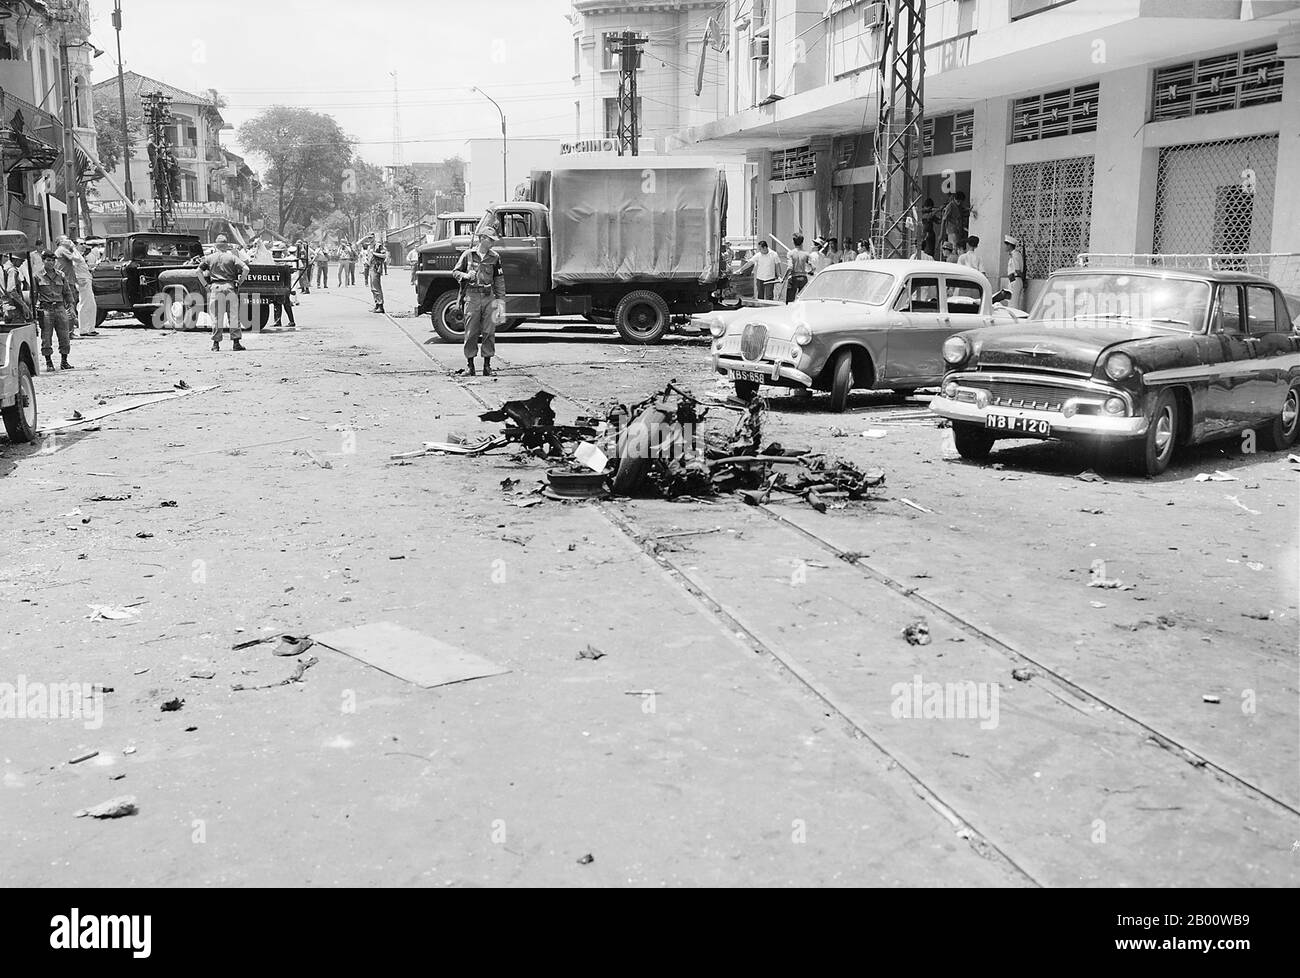 Vietnam: Aftermath of a street bombing attributed to the NLF (Viet Cong) in Saigon, c. 1965.  The Second Indochina War, known in America as the Vietnam War, was a Cold War era military conflict that occurred in Vietnam, Laos, and Cambodia from 1 November 1955 to the fall of Saigon on 30 April 1975. This war followed the First Indochina War and was fought between North Vietnam, supported by its communist allies, and the government of South Vietnam, supported by the U.S. and other anti-communist nations. Stock Photo